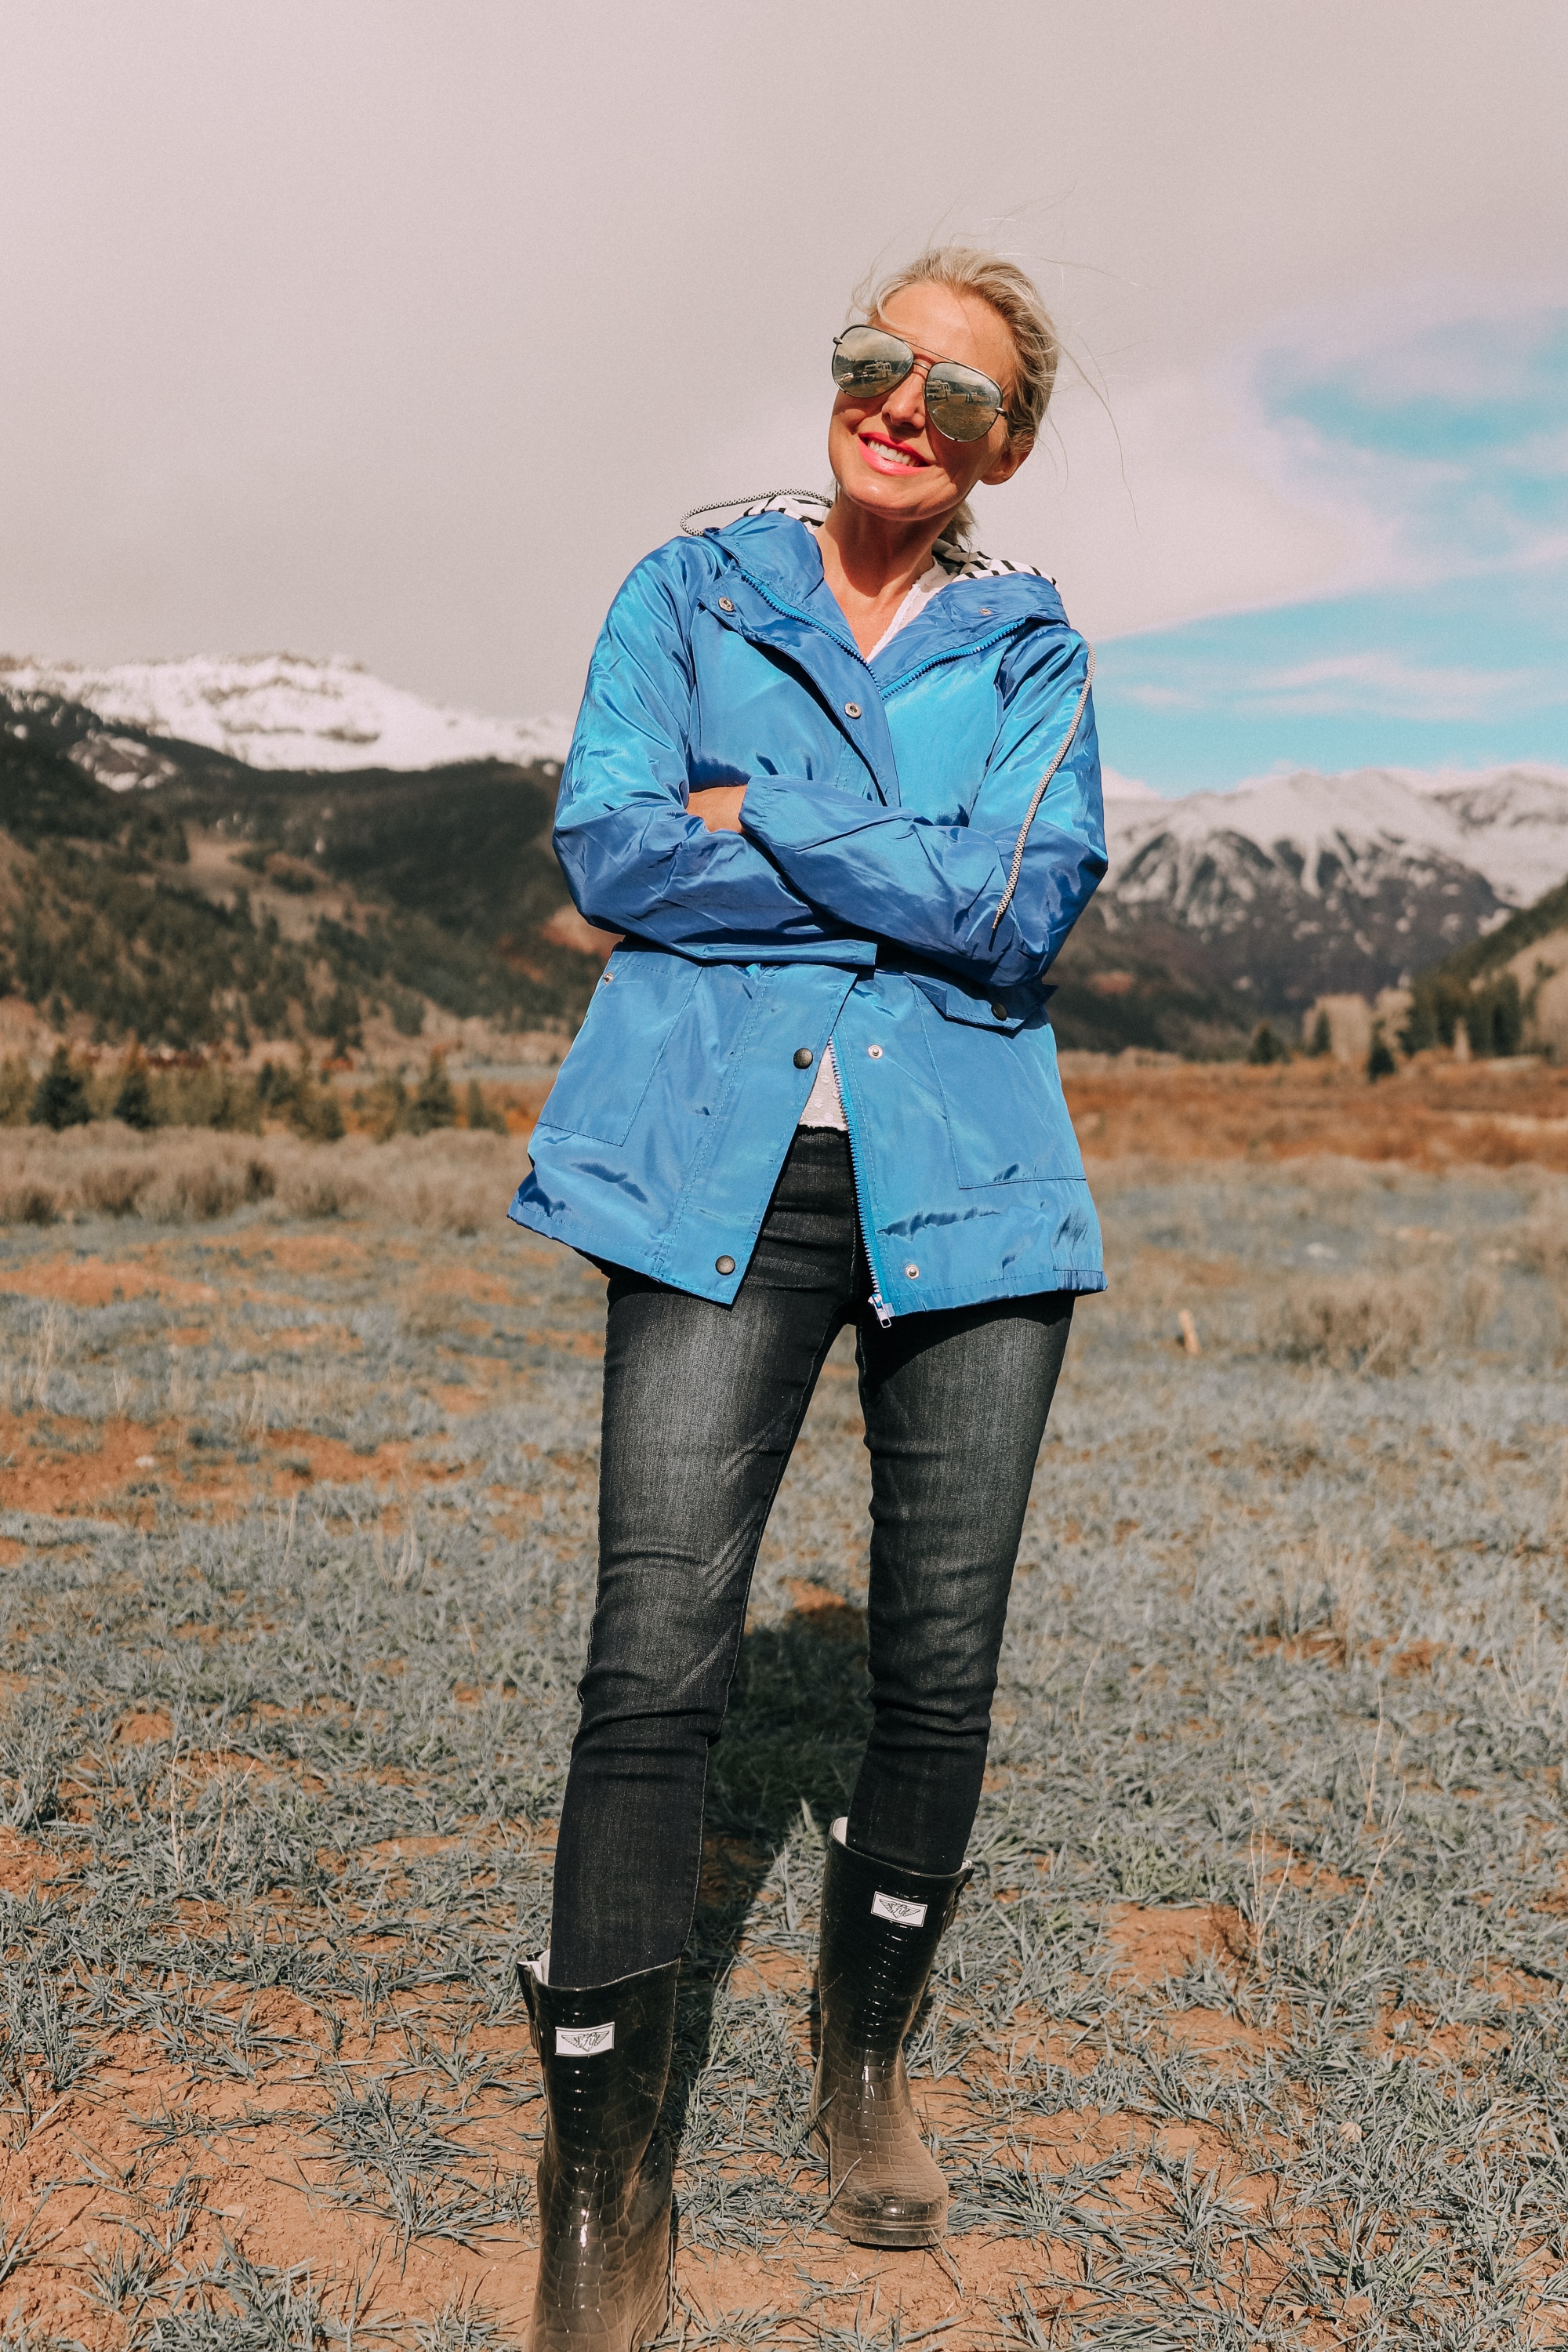 fashion blogger erin busbee in telluride colorado wearing affordable blue waterproof lightweight hooded raincoat over white cinched blouse paired with dark wash skinny ankle jeans styled with croc patterned rubber rain boots